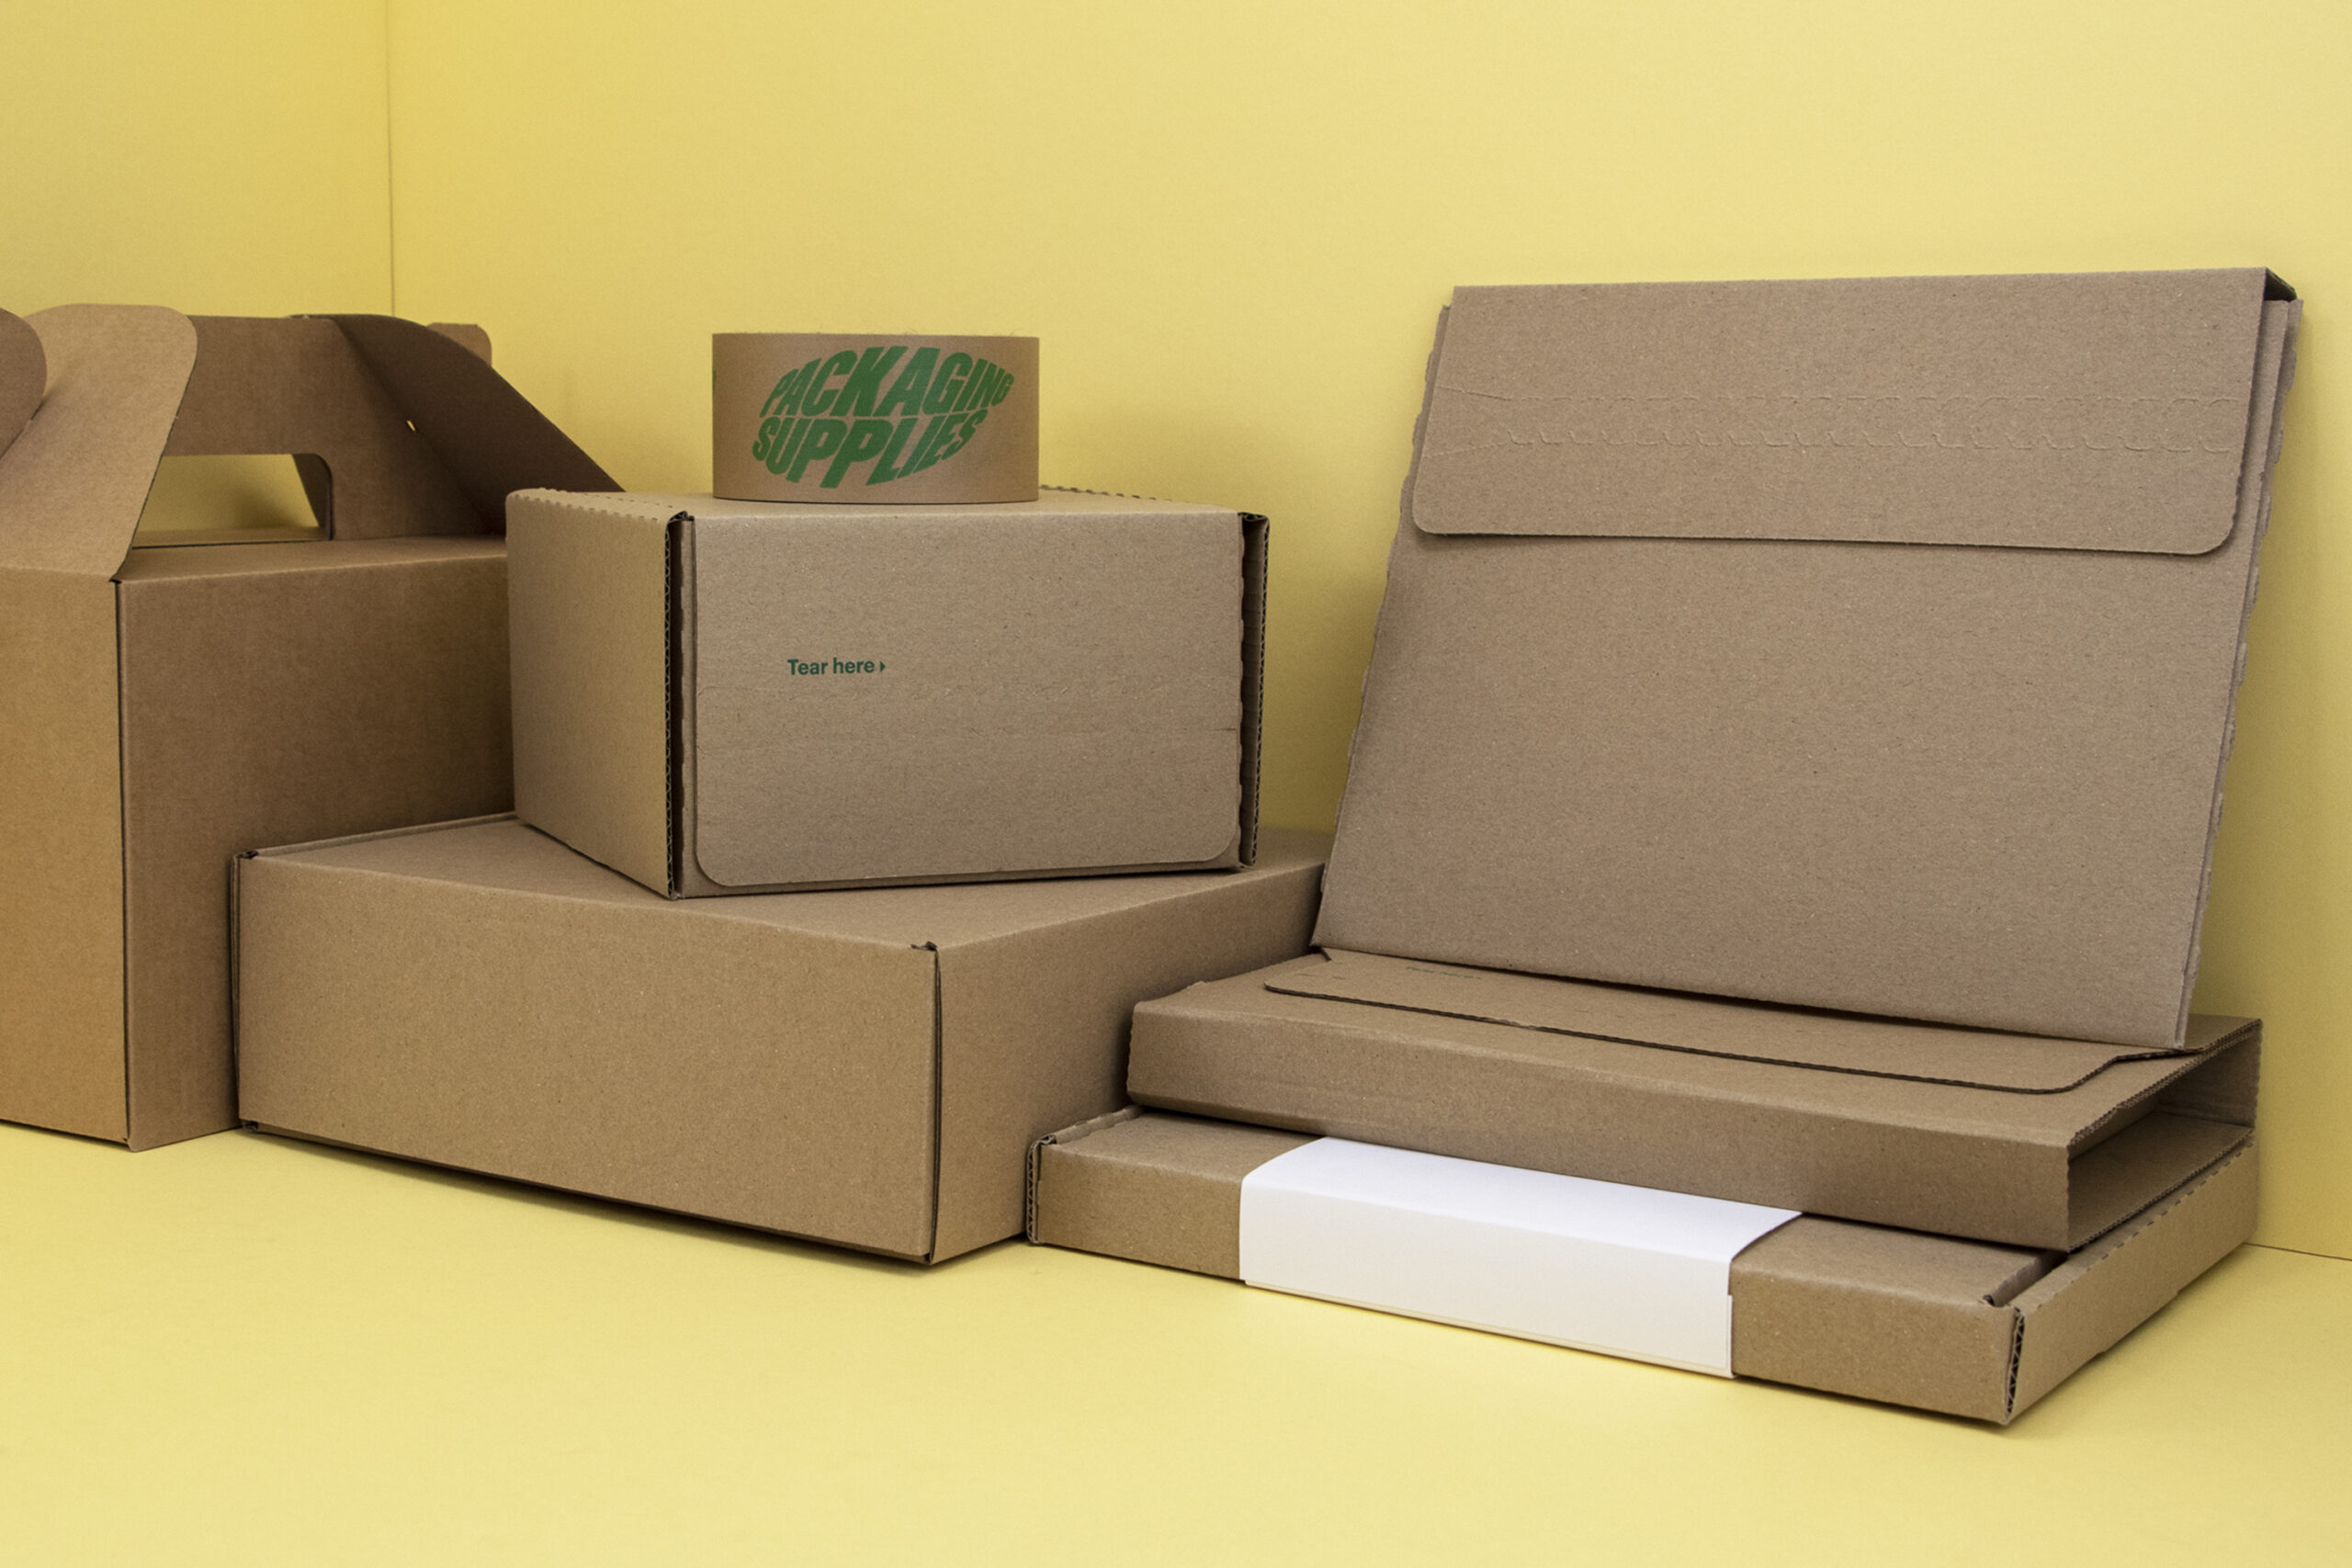 Stock Products - postal boxes, carry packs, envelopes, tape 2